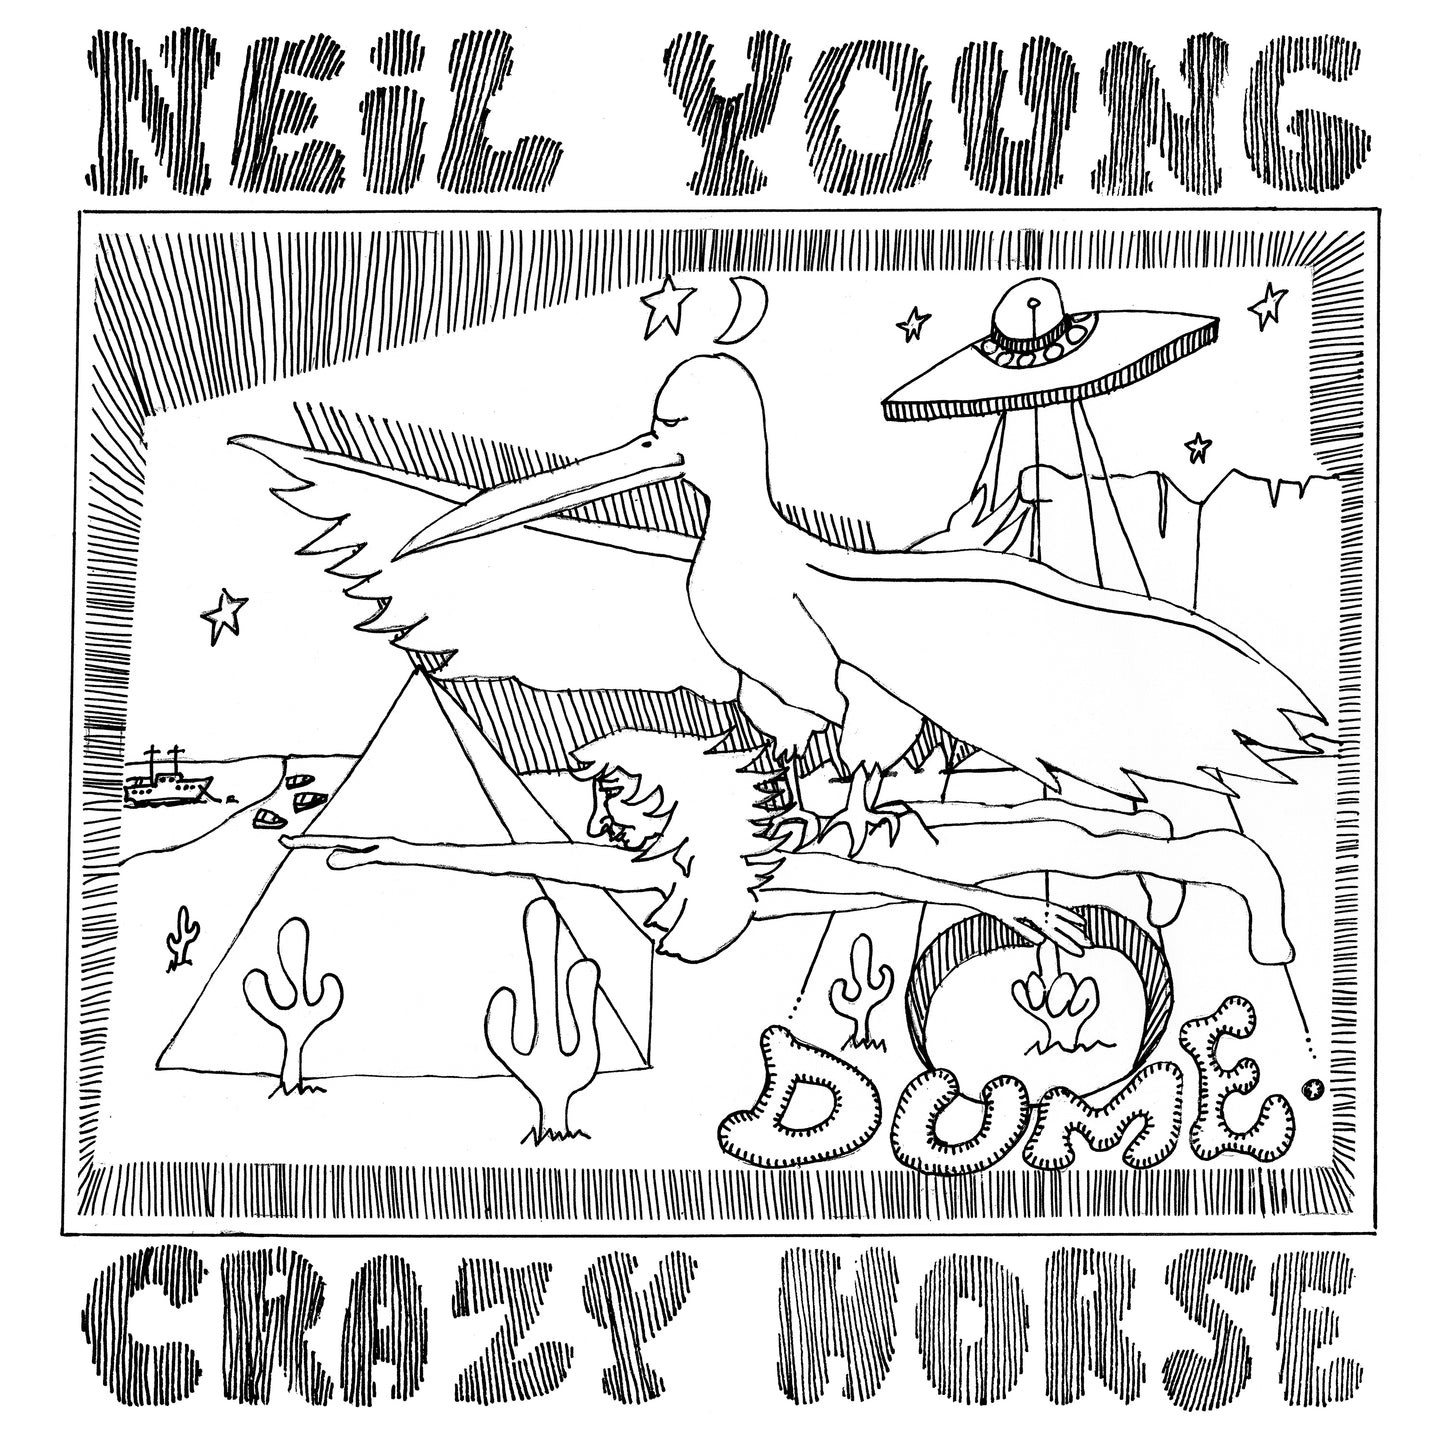 Neil Young with Crazy Horse "Dume" (Multiple Variants)